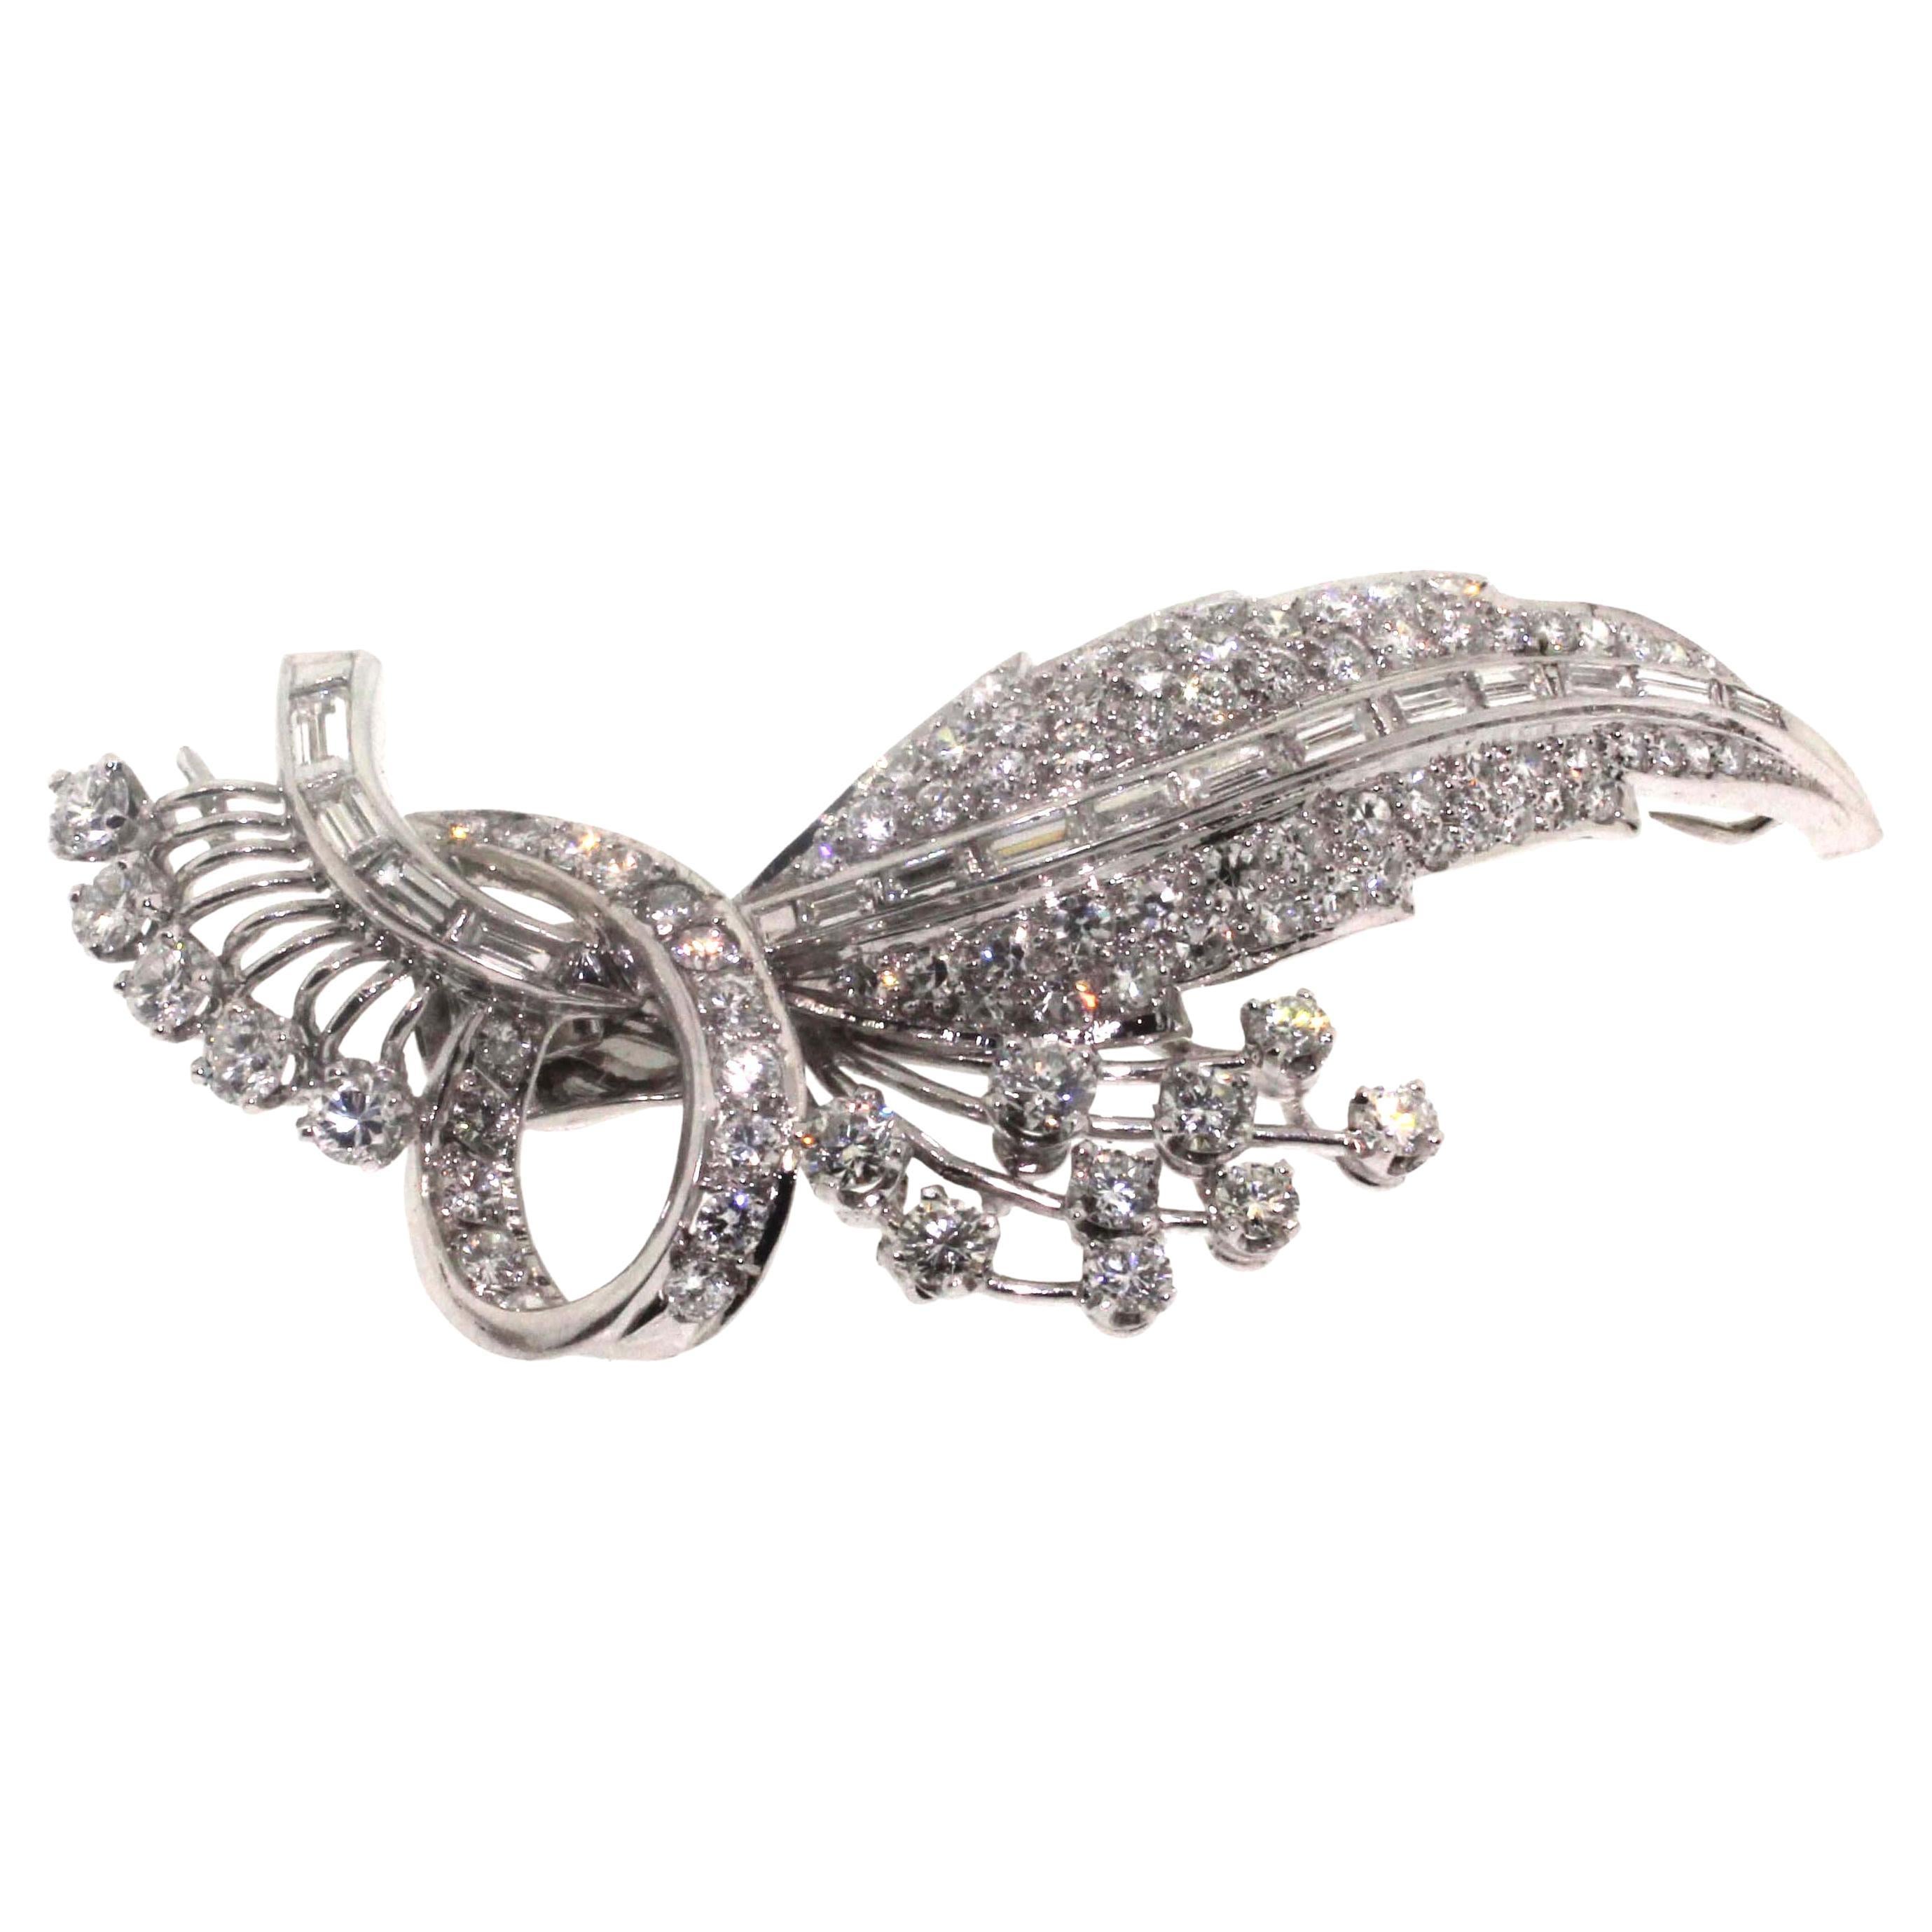 Jewel Of Ocean Platinum with Diamond brooch set
Platinum  
Weight (g): 28.4
Estimated Manufactures Retail Price: $ 
Excellent  Condition
Length 2.5